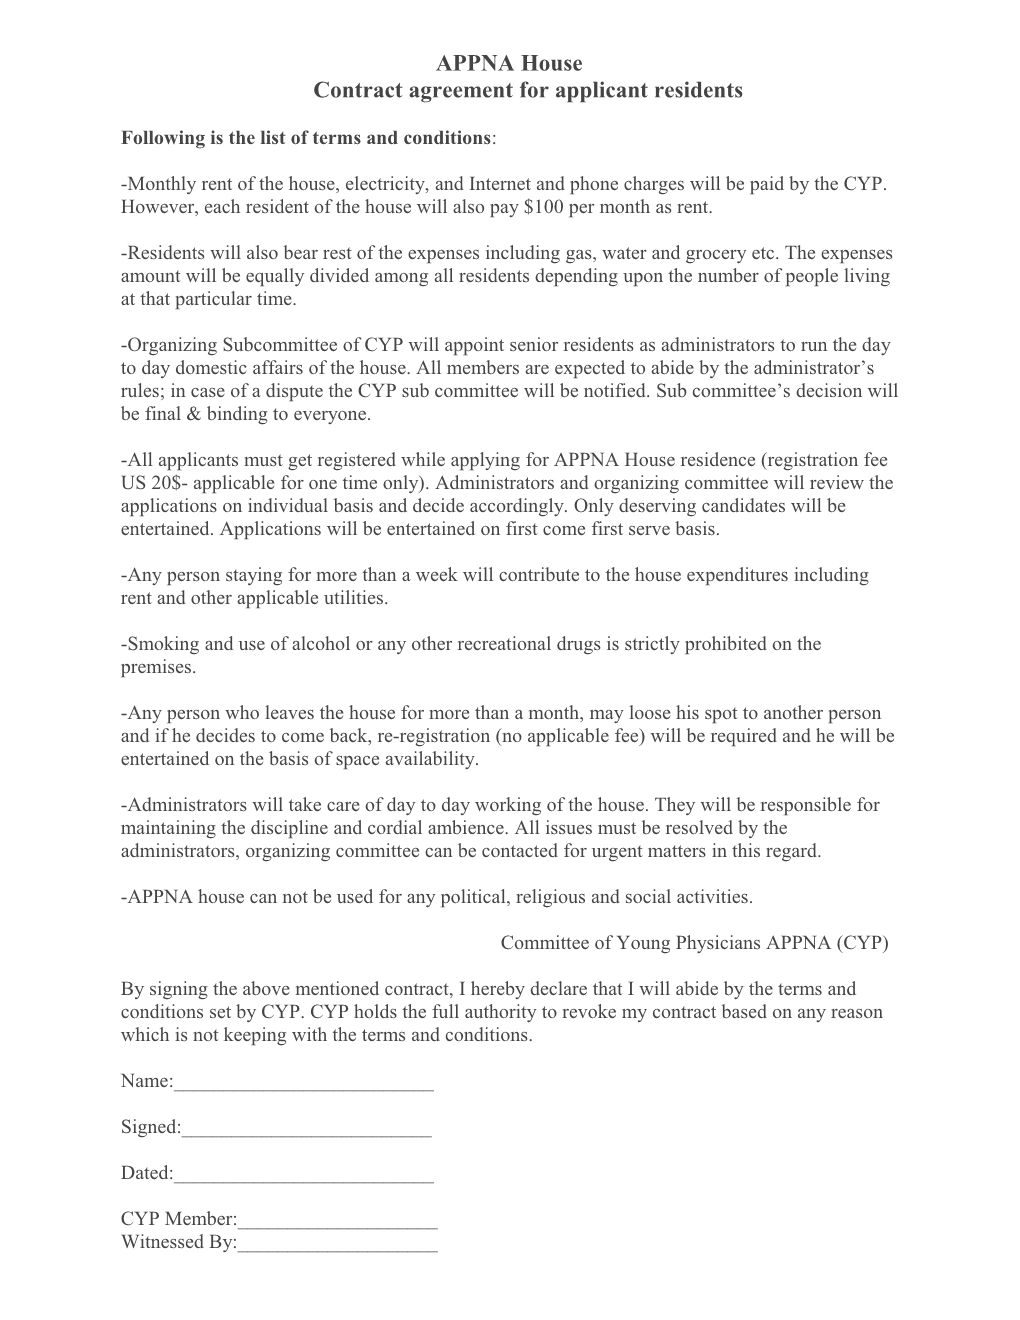 APPNA House Contract Agreement for Applicant Residents